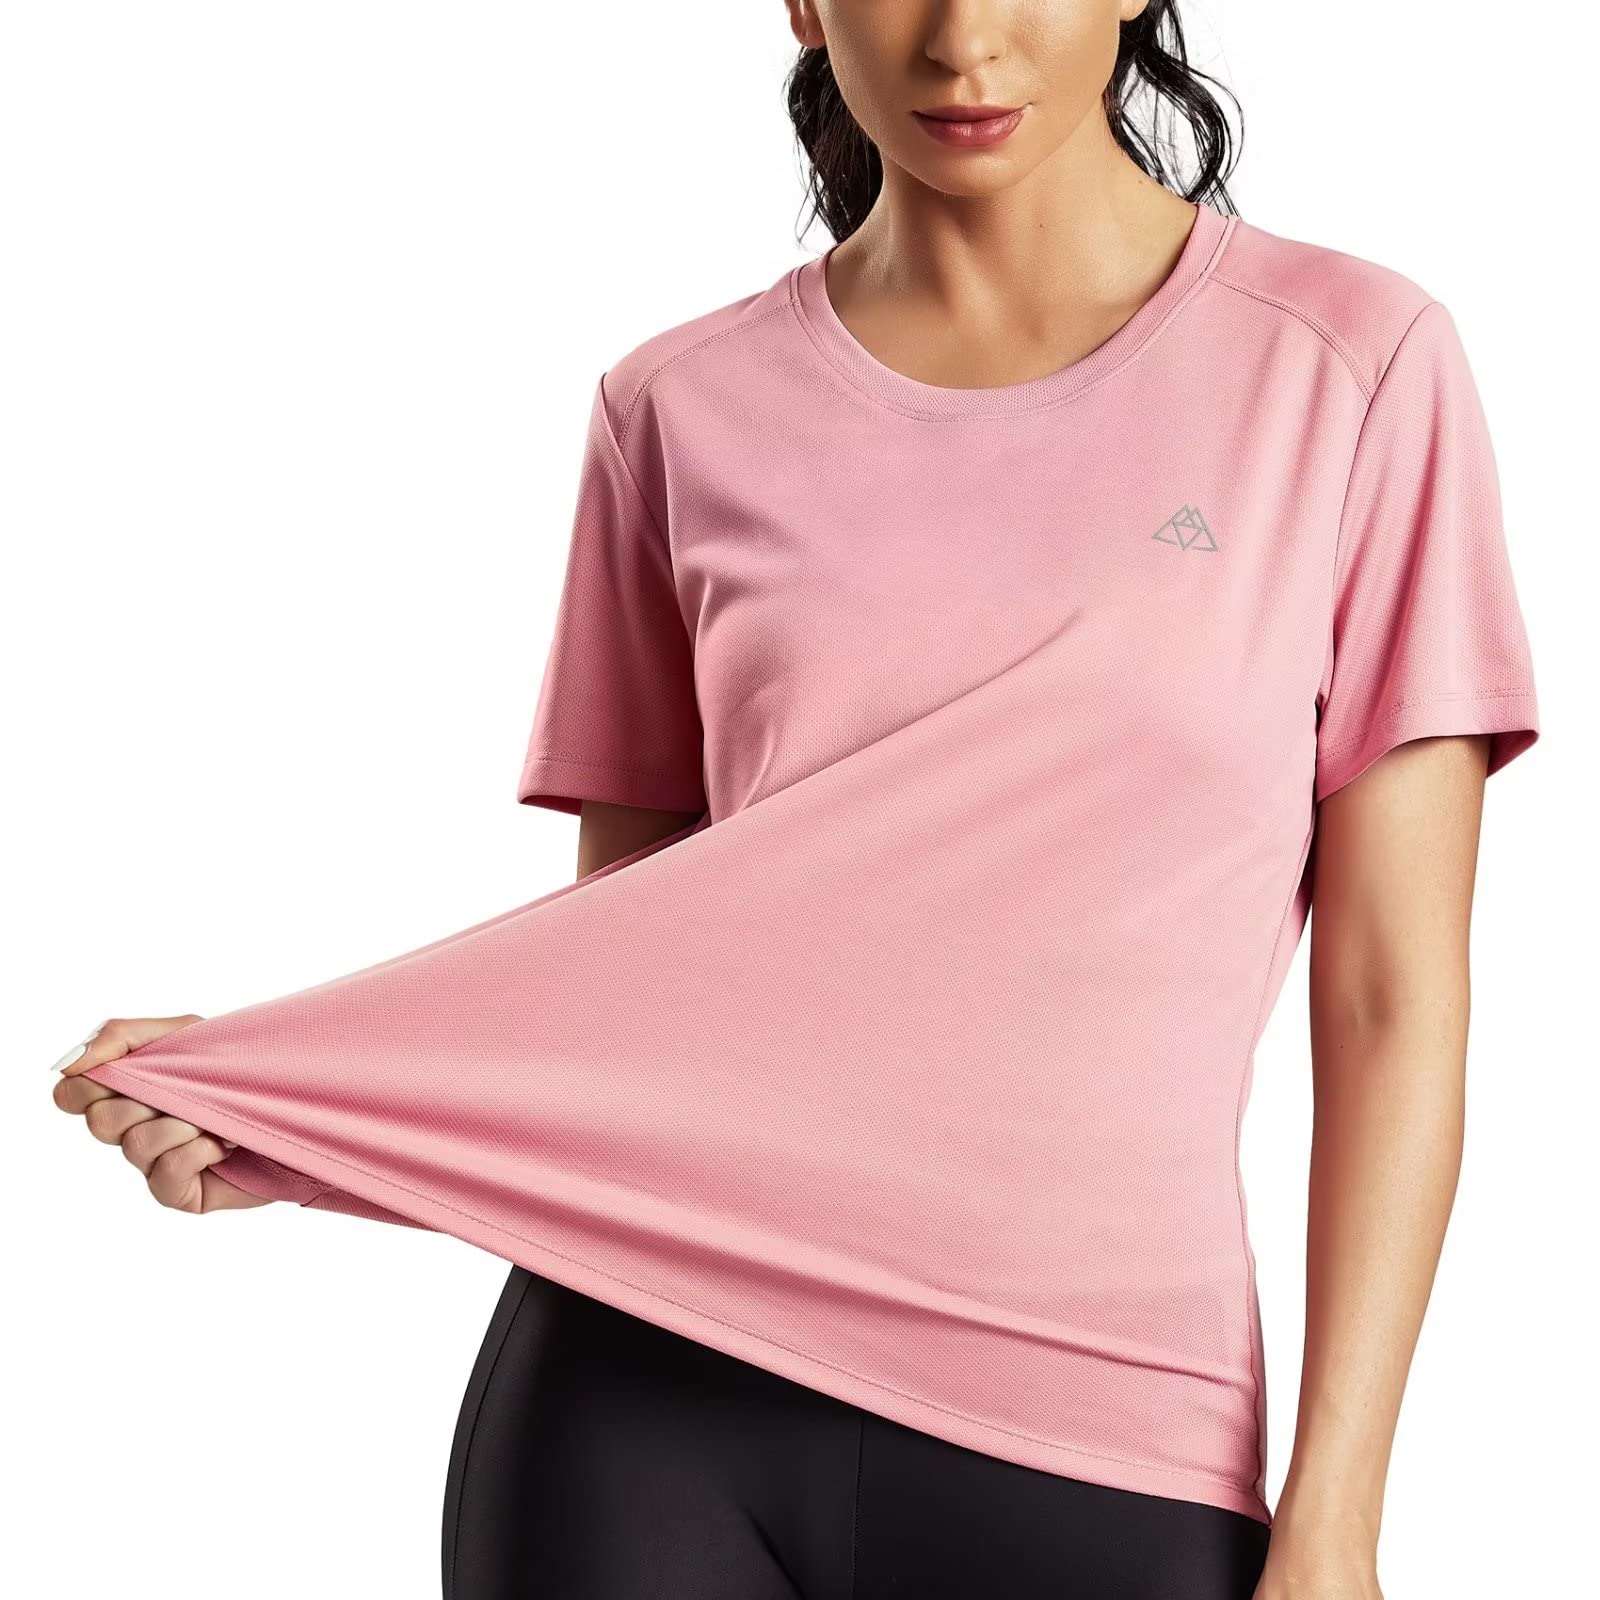 Haimont Women's Dry Fit Athletic T-Shirts Active Mesh Tee Shirt